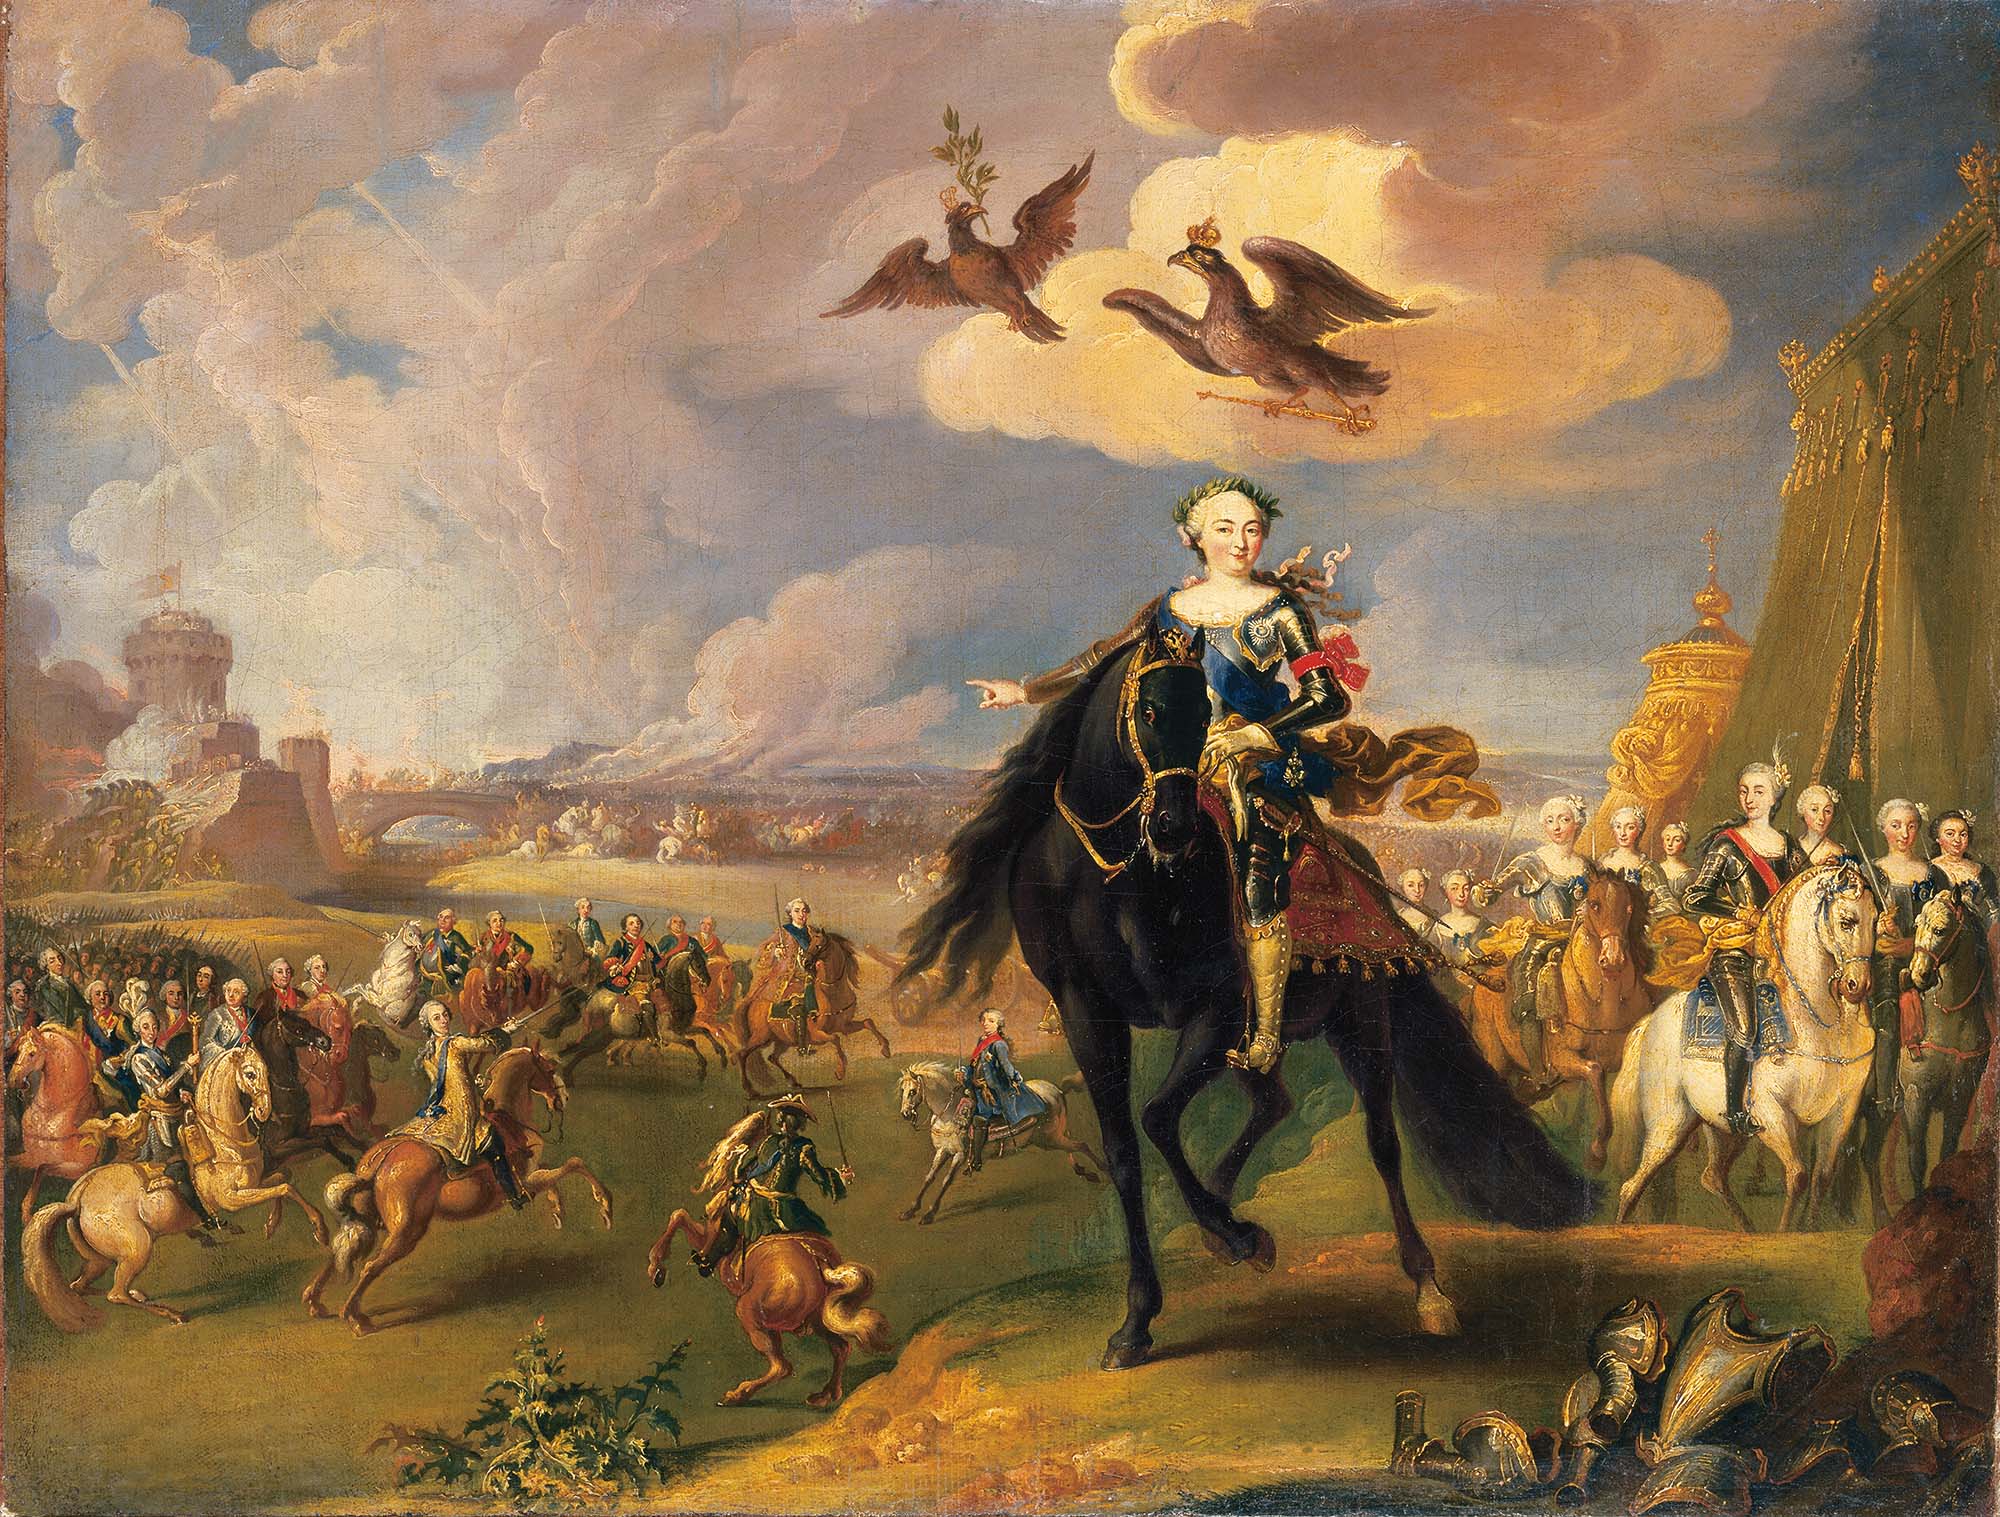 Georg Christoph Grooth, Equestrian Portrait of the Empress Elizabeth Petrovna with an African boy, 1743, Tretyakov Gallery, Moscow, Russia.